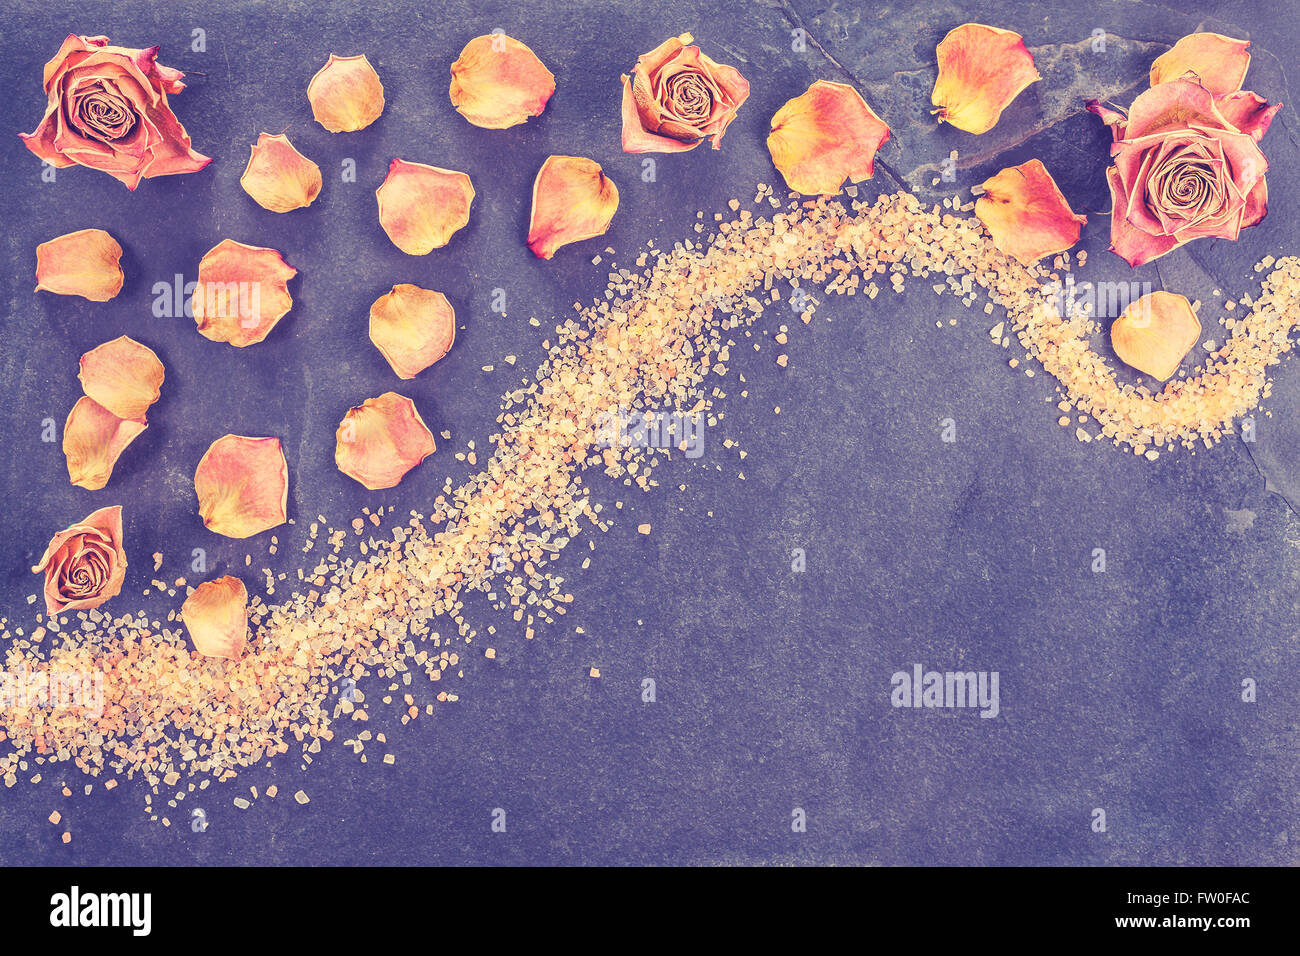 Vintage stylized dried roses and petals on slate, concept background with copy space. Stock Photo